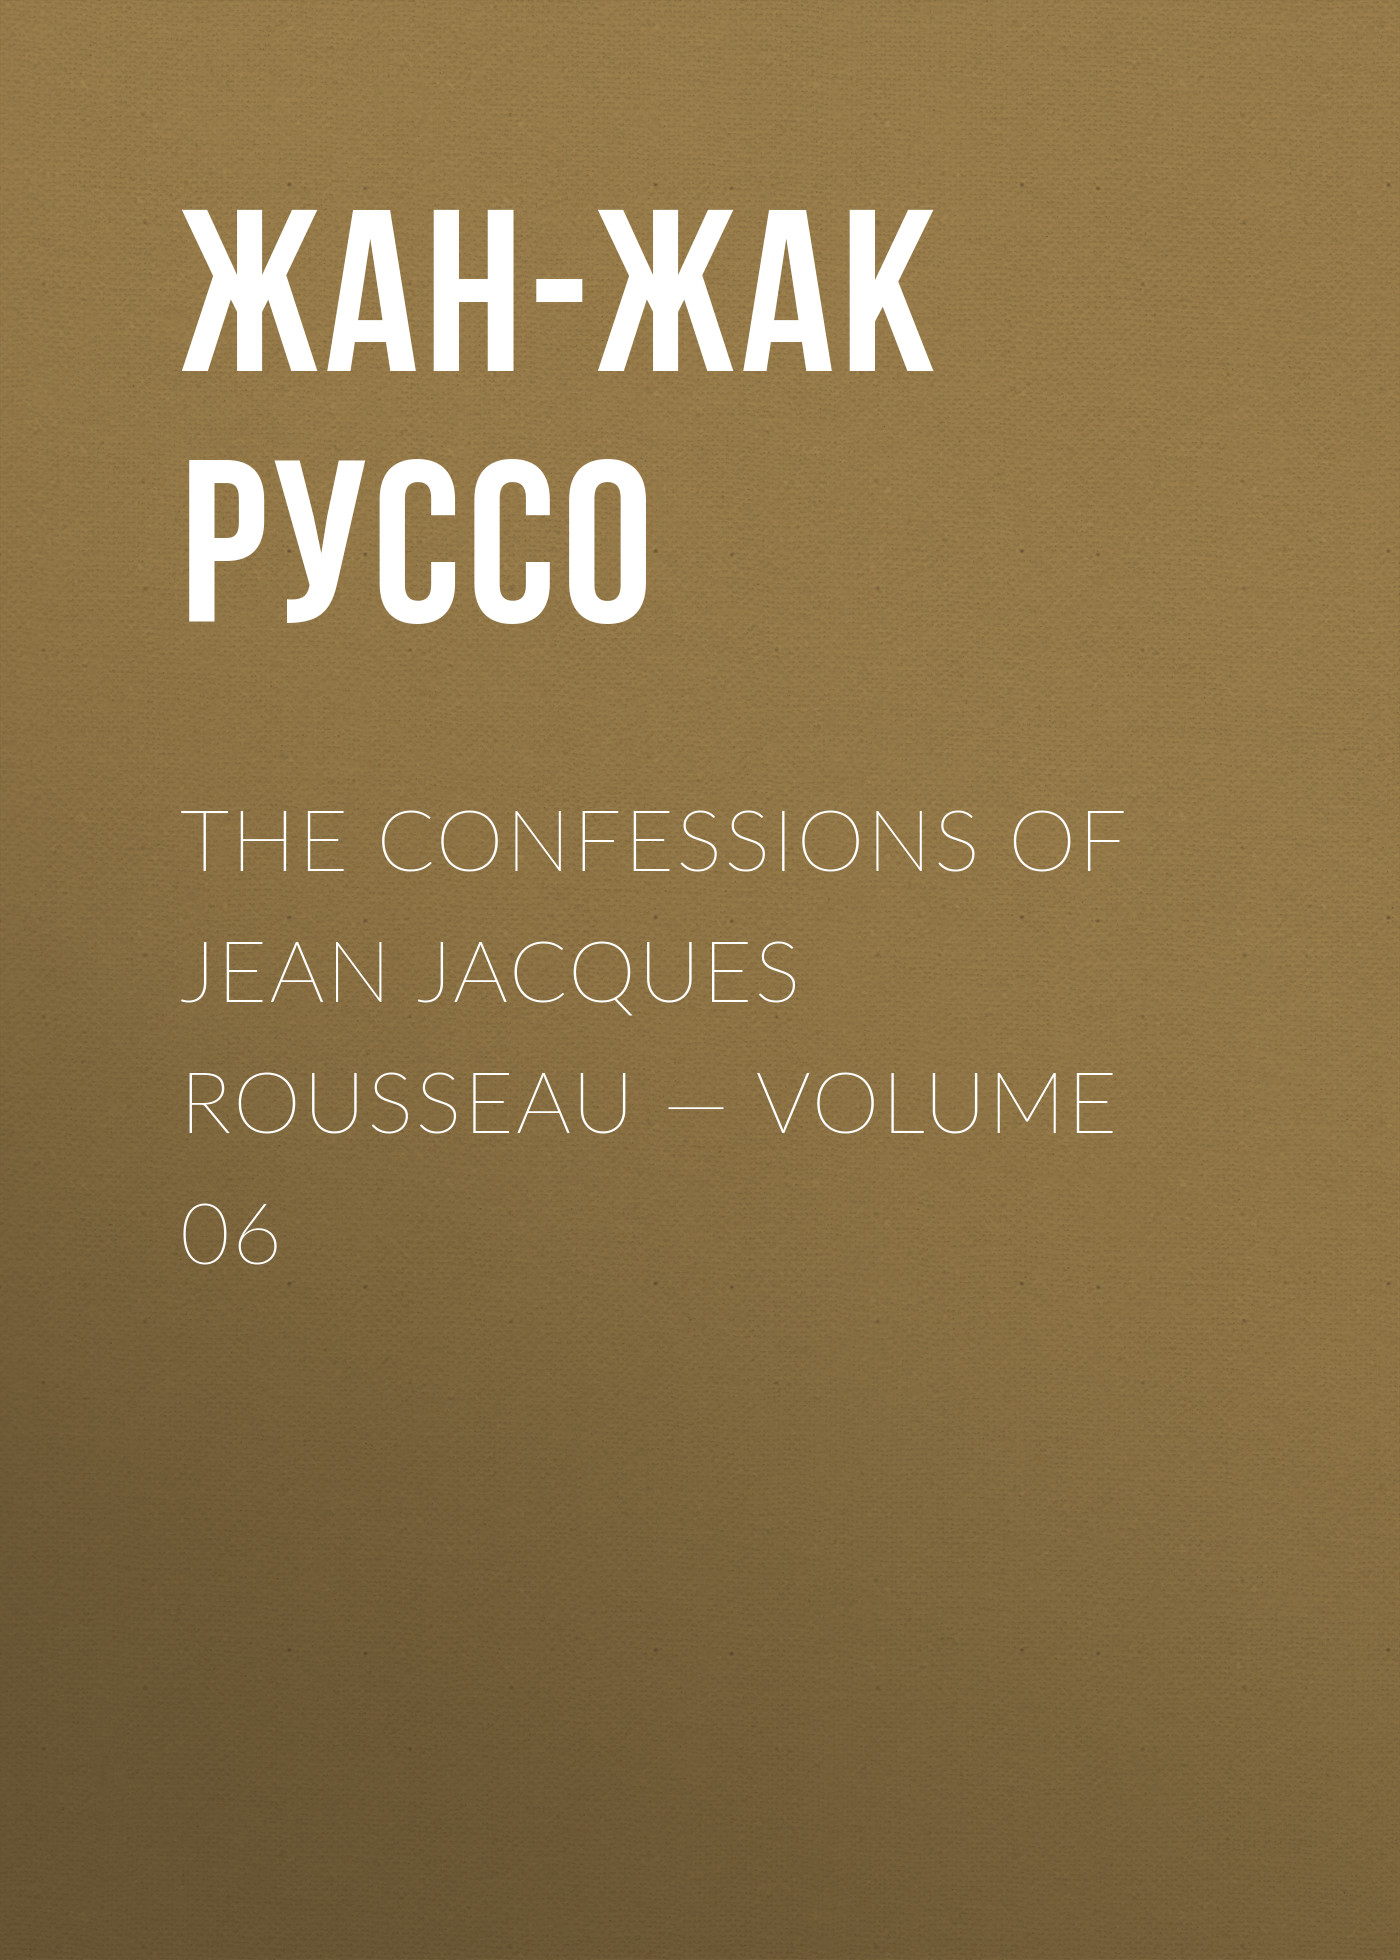 The Confessions of Jean Jacques Rousseau— Volume 06